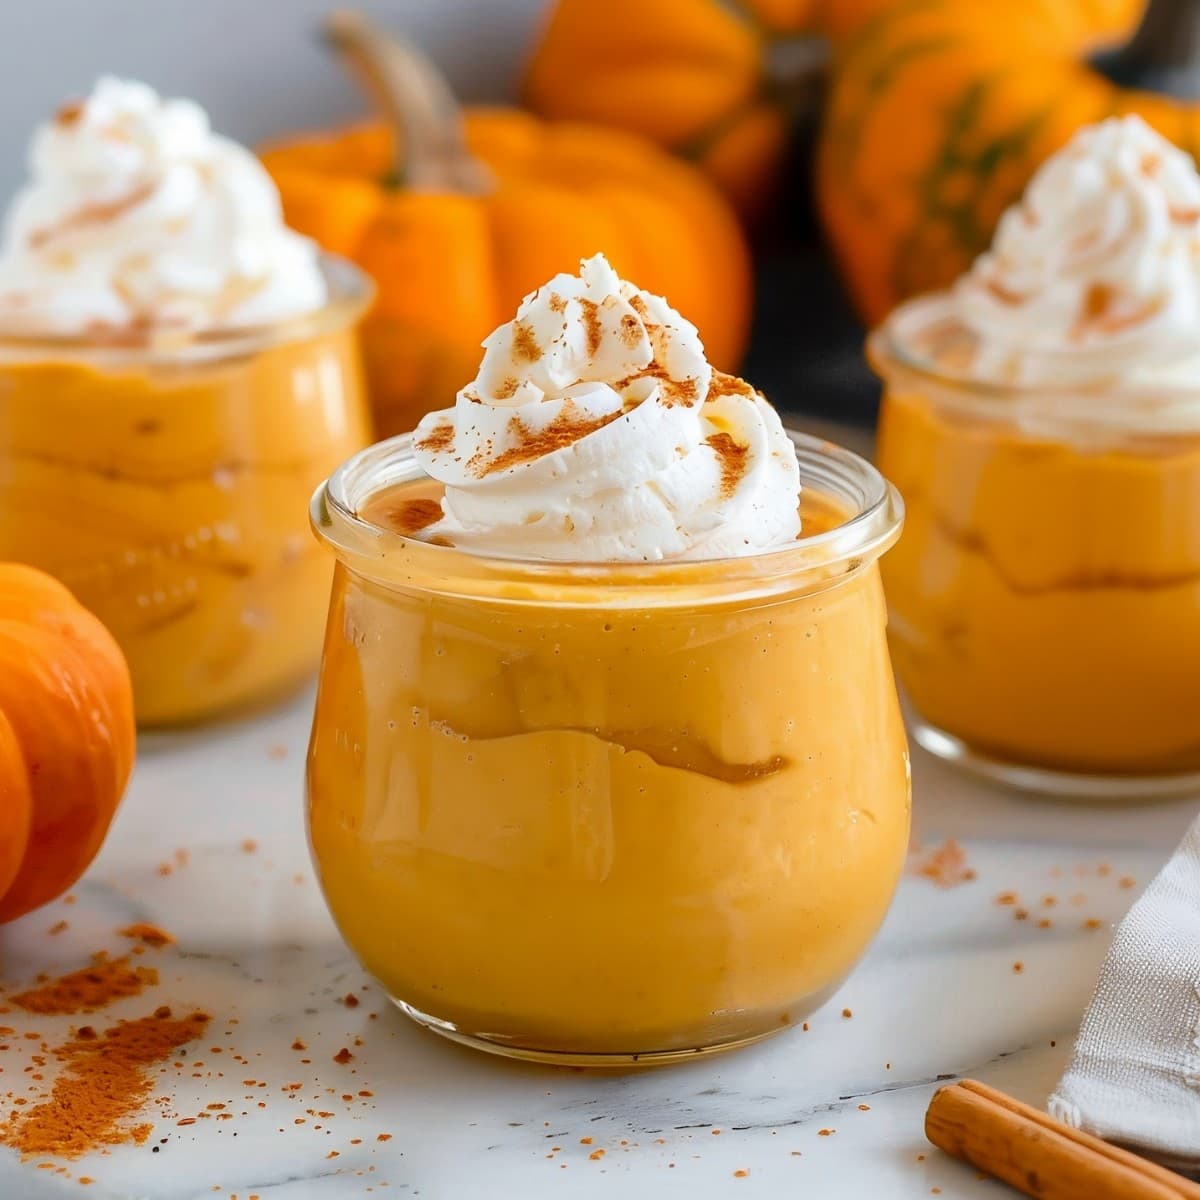 Pumpkin mousse in a glass jar topped with whipped cream and a pinch of cinnamon